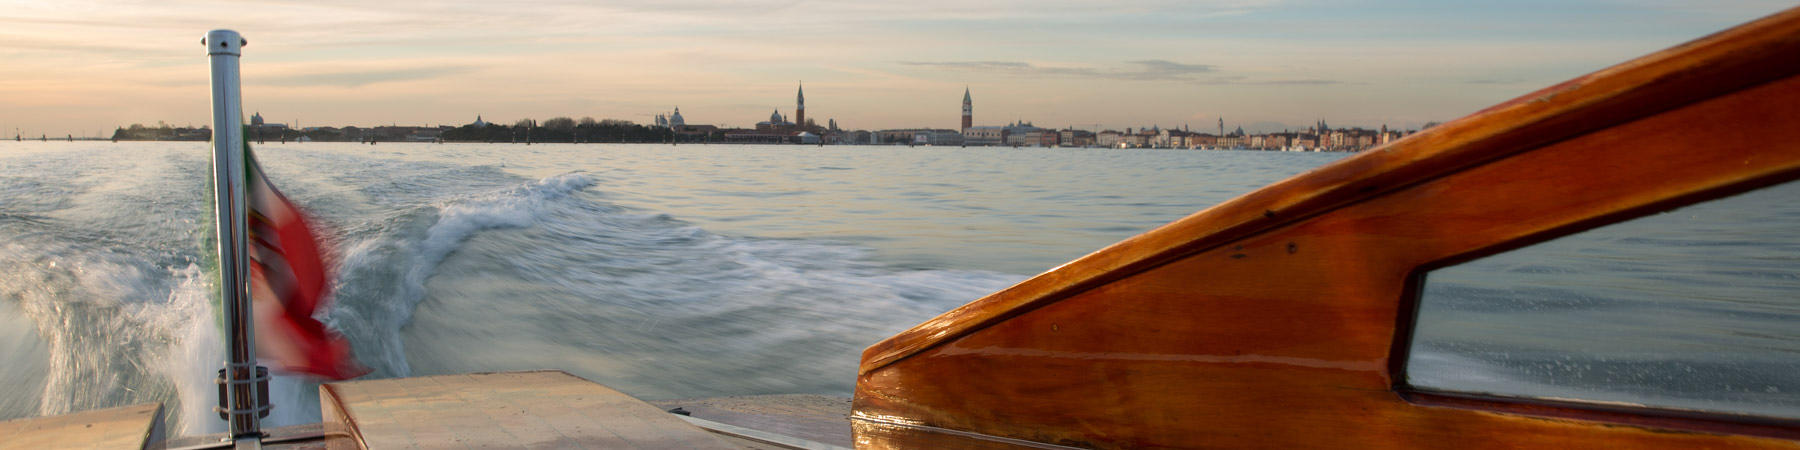 Venice like never seen before - Photo Pêcheur d'Images